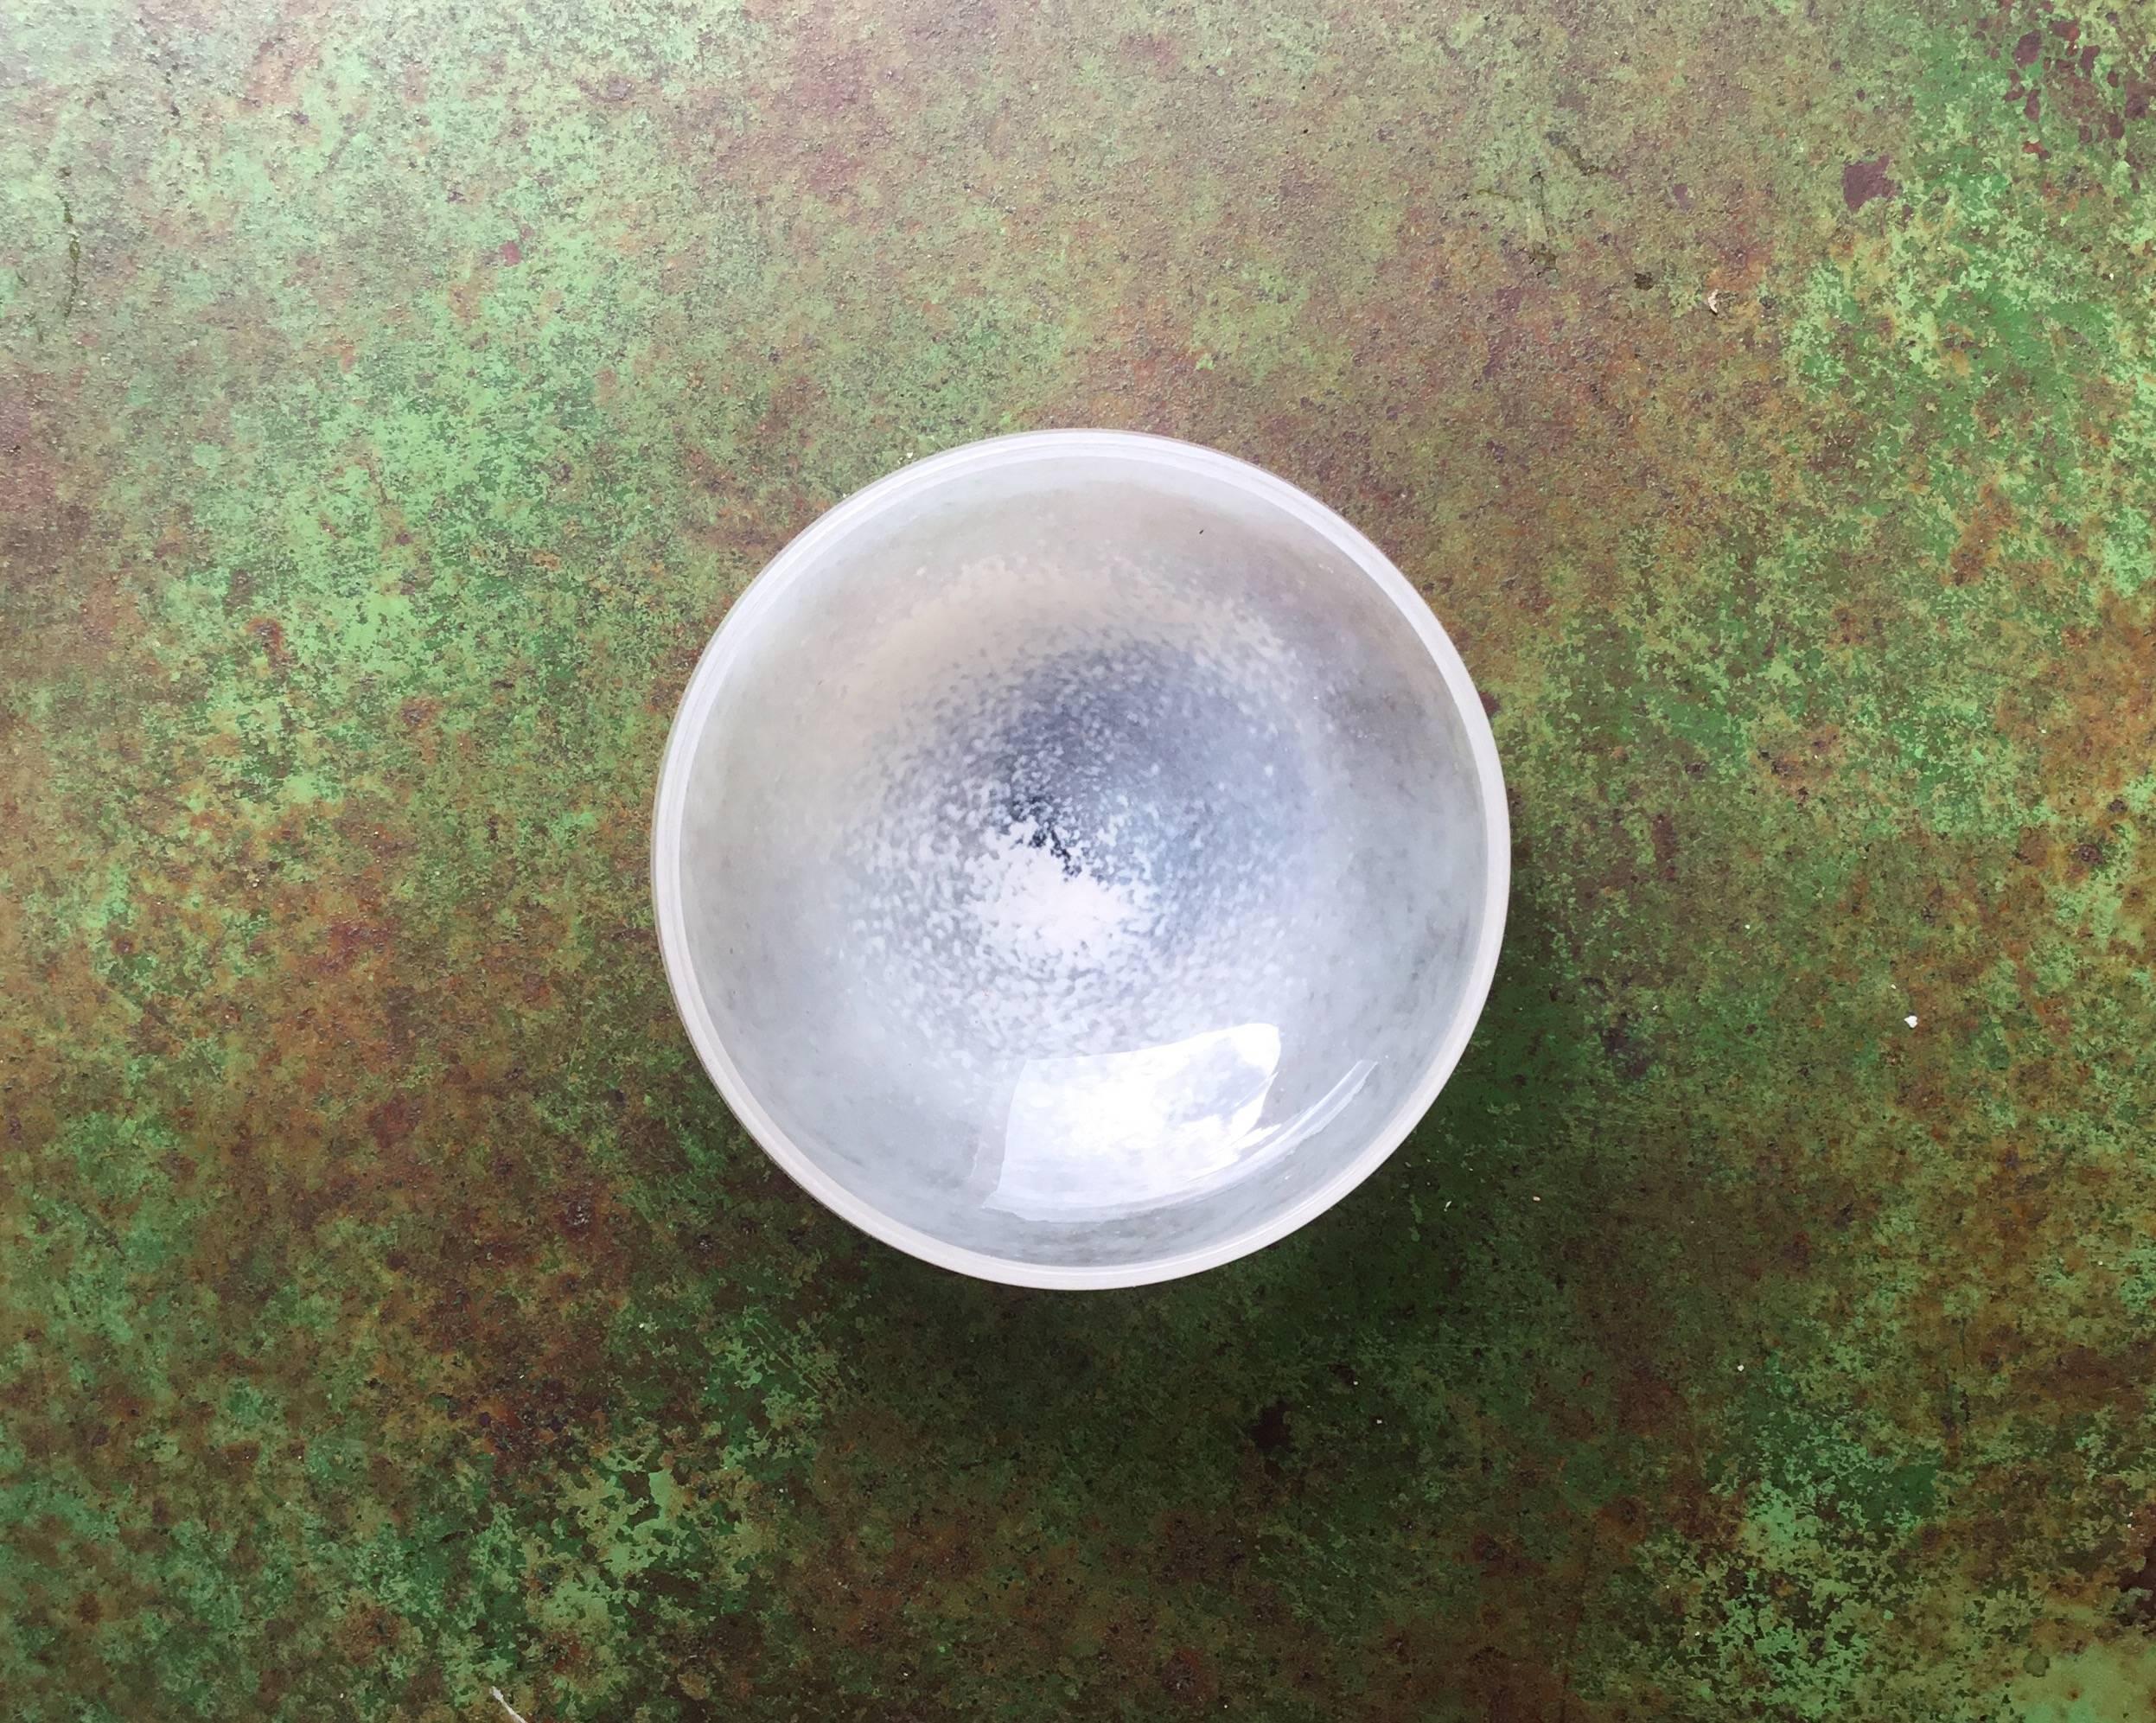 A contemporary glass bowl from a specialist glass workshop in Osaka.

The iridescent pearl-like quality of this bowl has a spiralling cloud like effect. It makes for for an extremely graceful object that can be displayed either on its own or layered